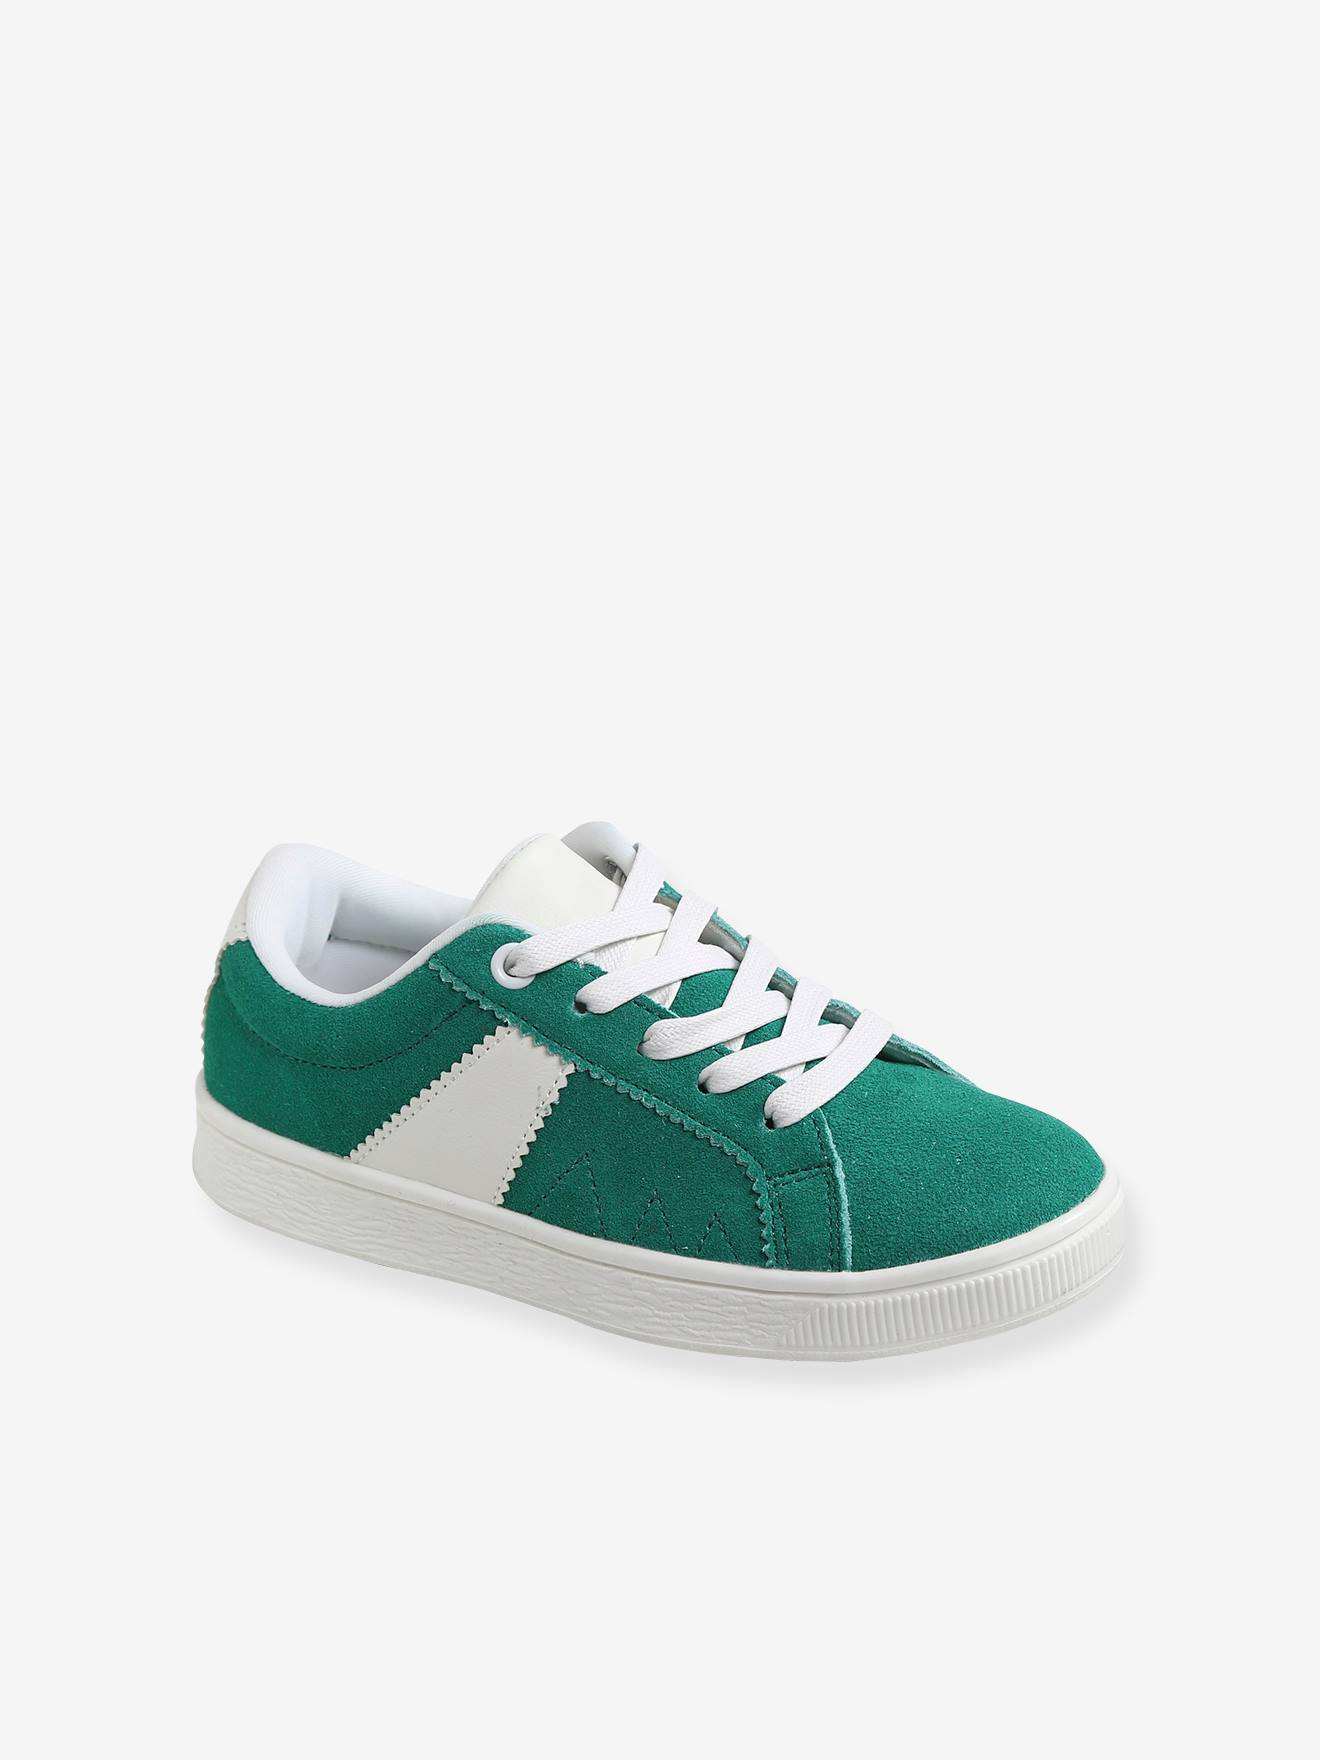 Split Leather Trainers for Boys - green 